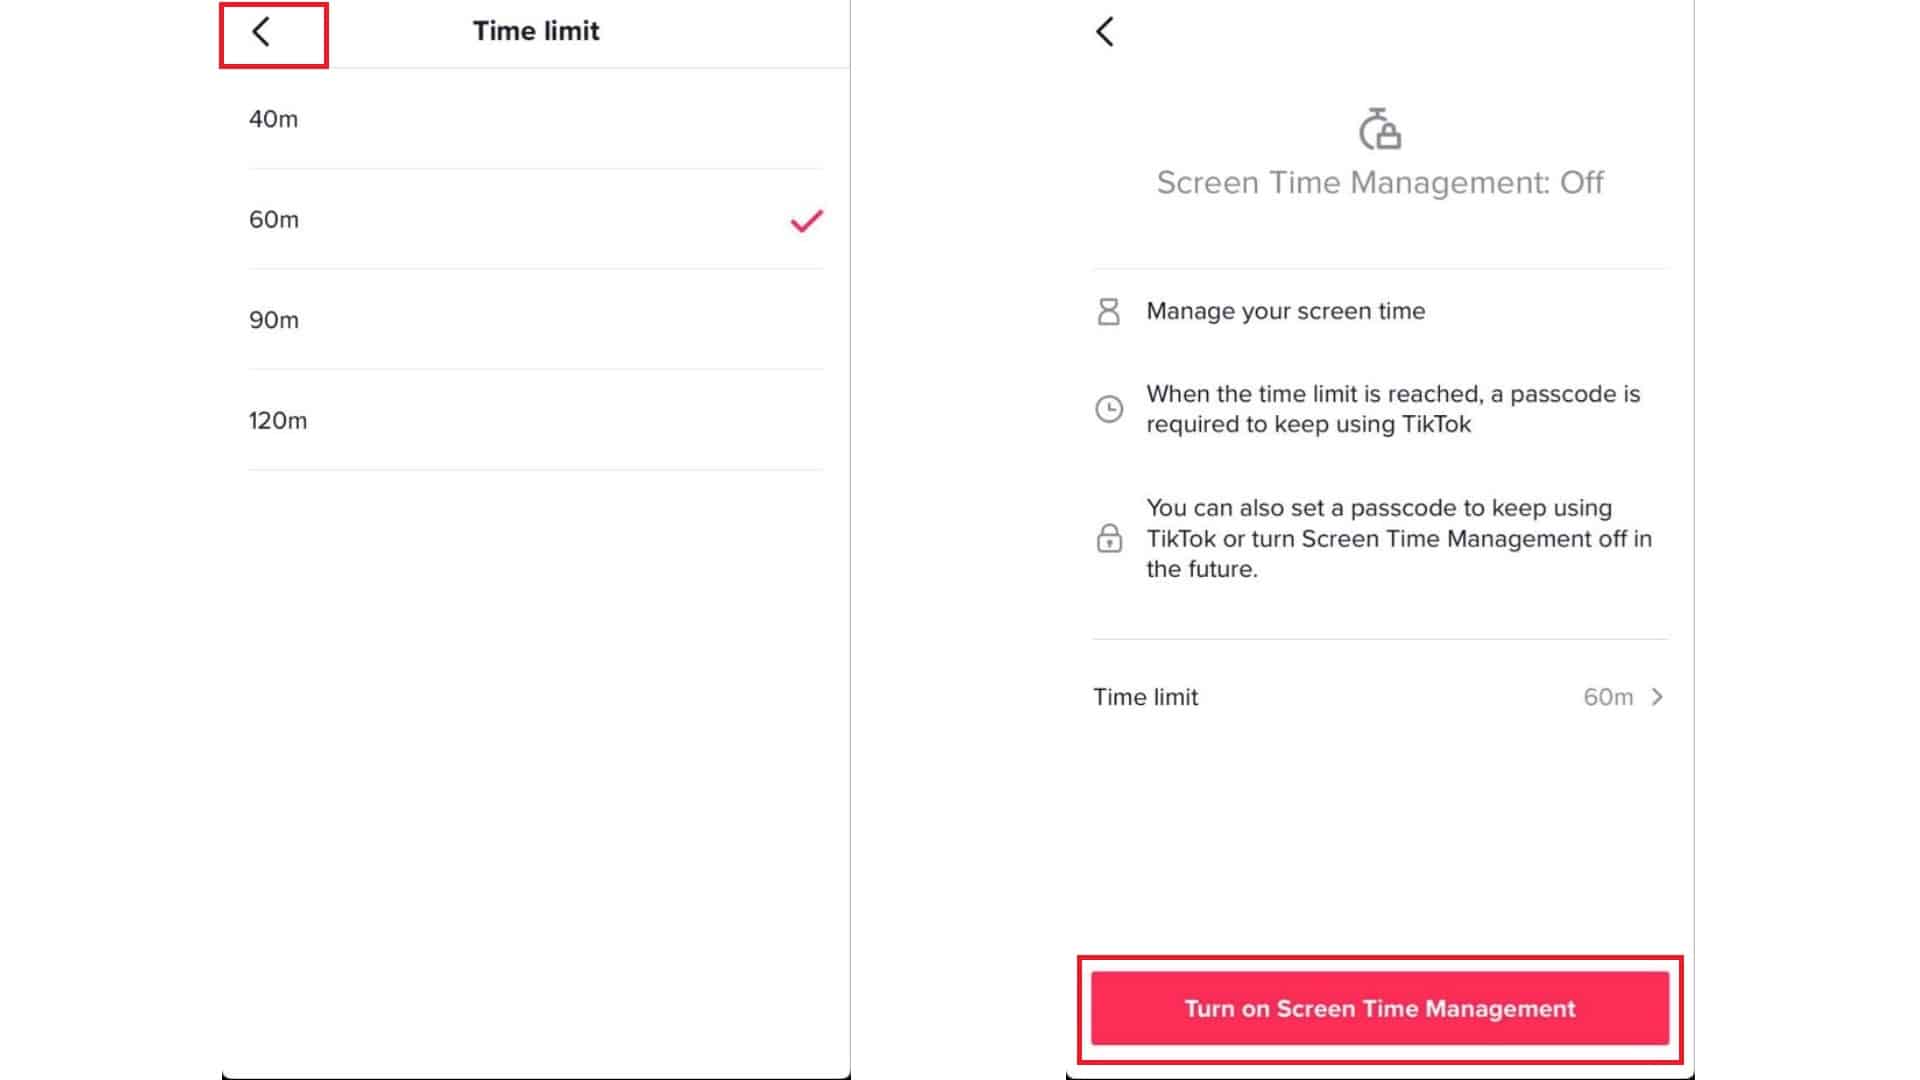 Enable-Screen-Time-Management-on-iPhone-TikTok-guide